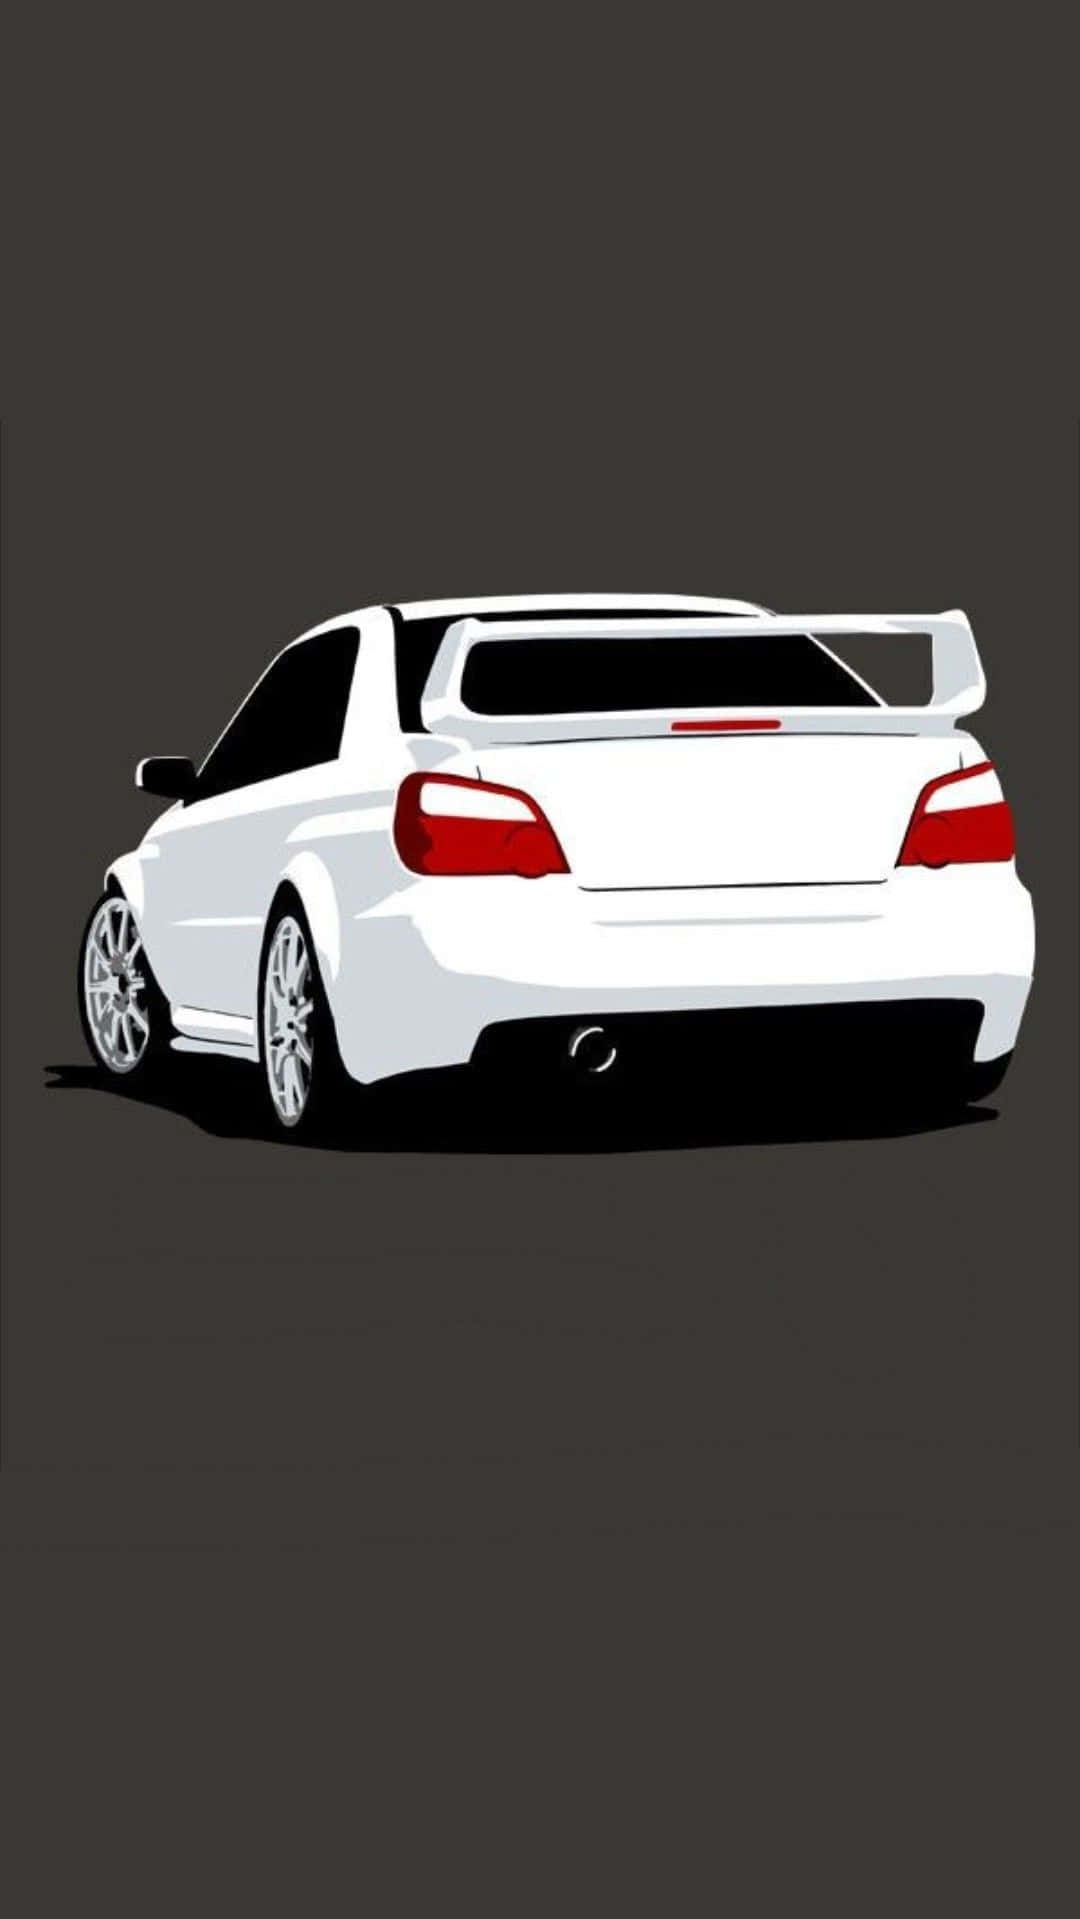 Bigger And Bolder: The New Jdm Iphone Background